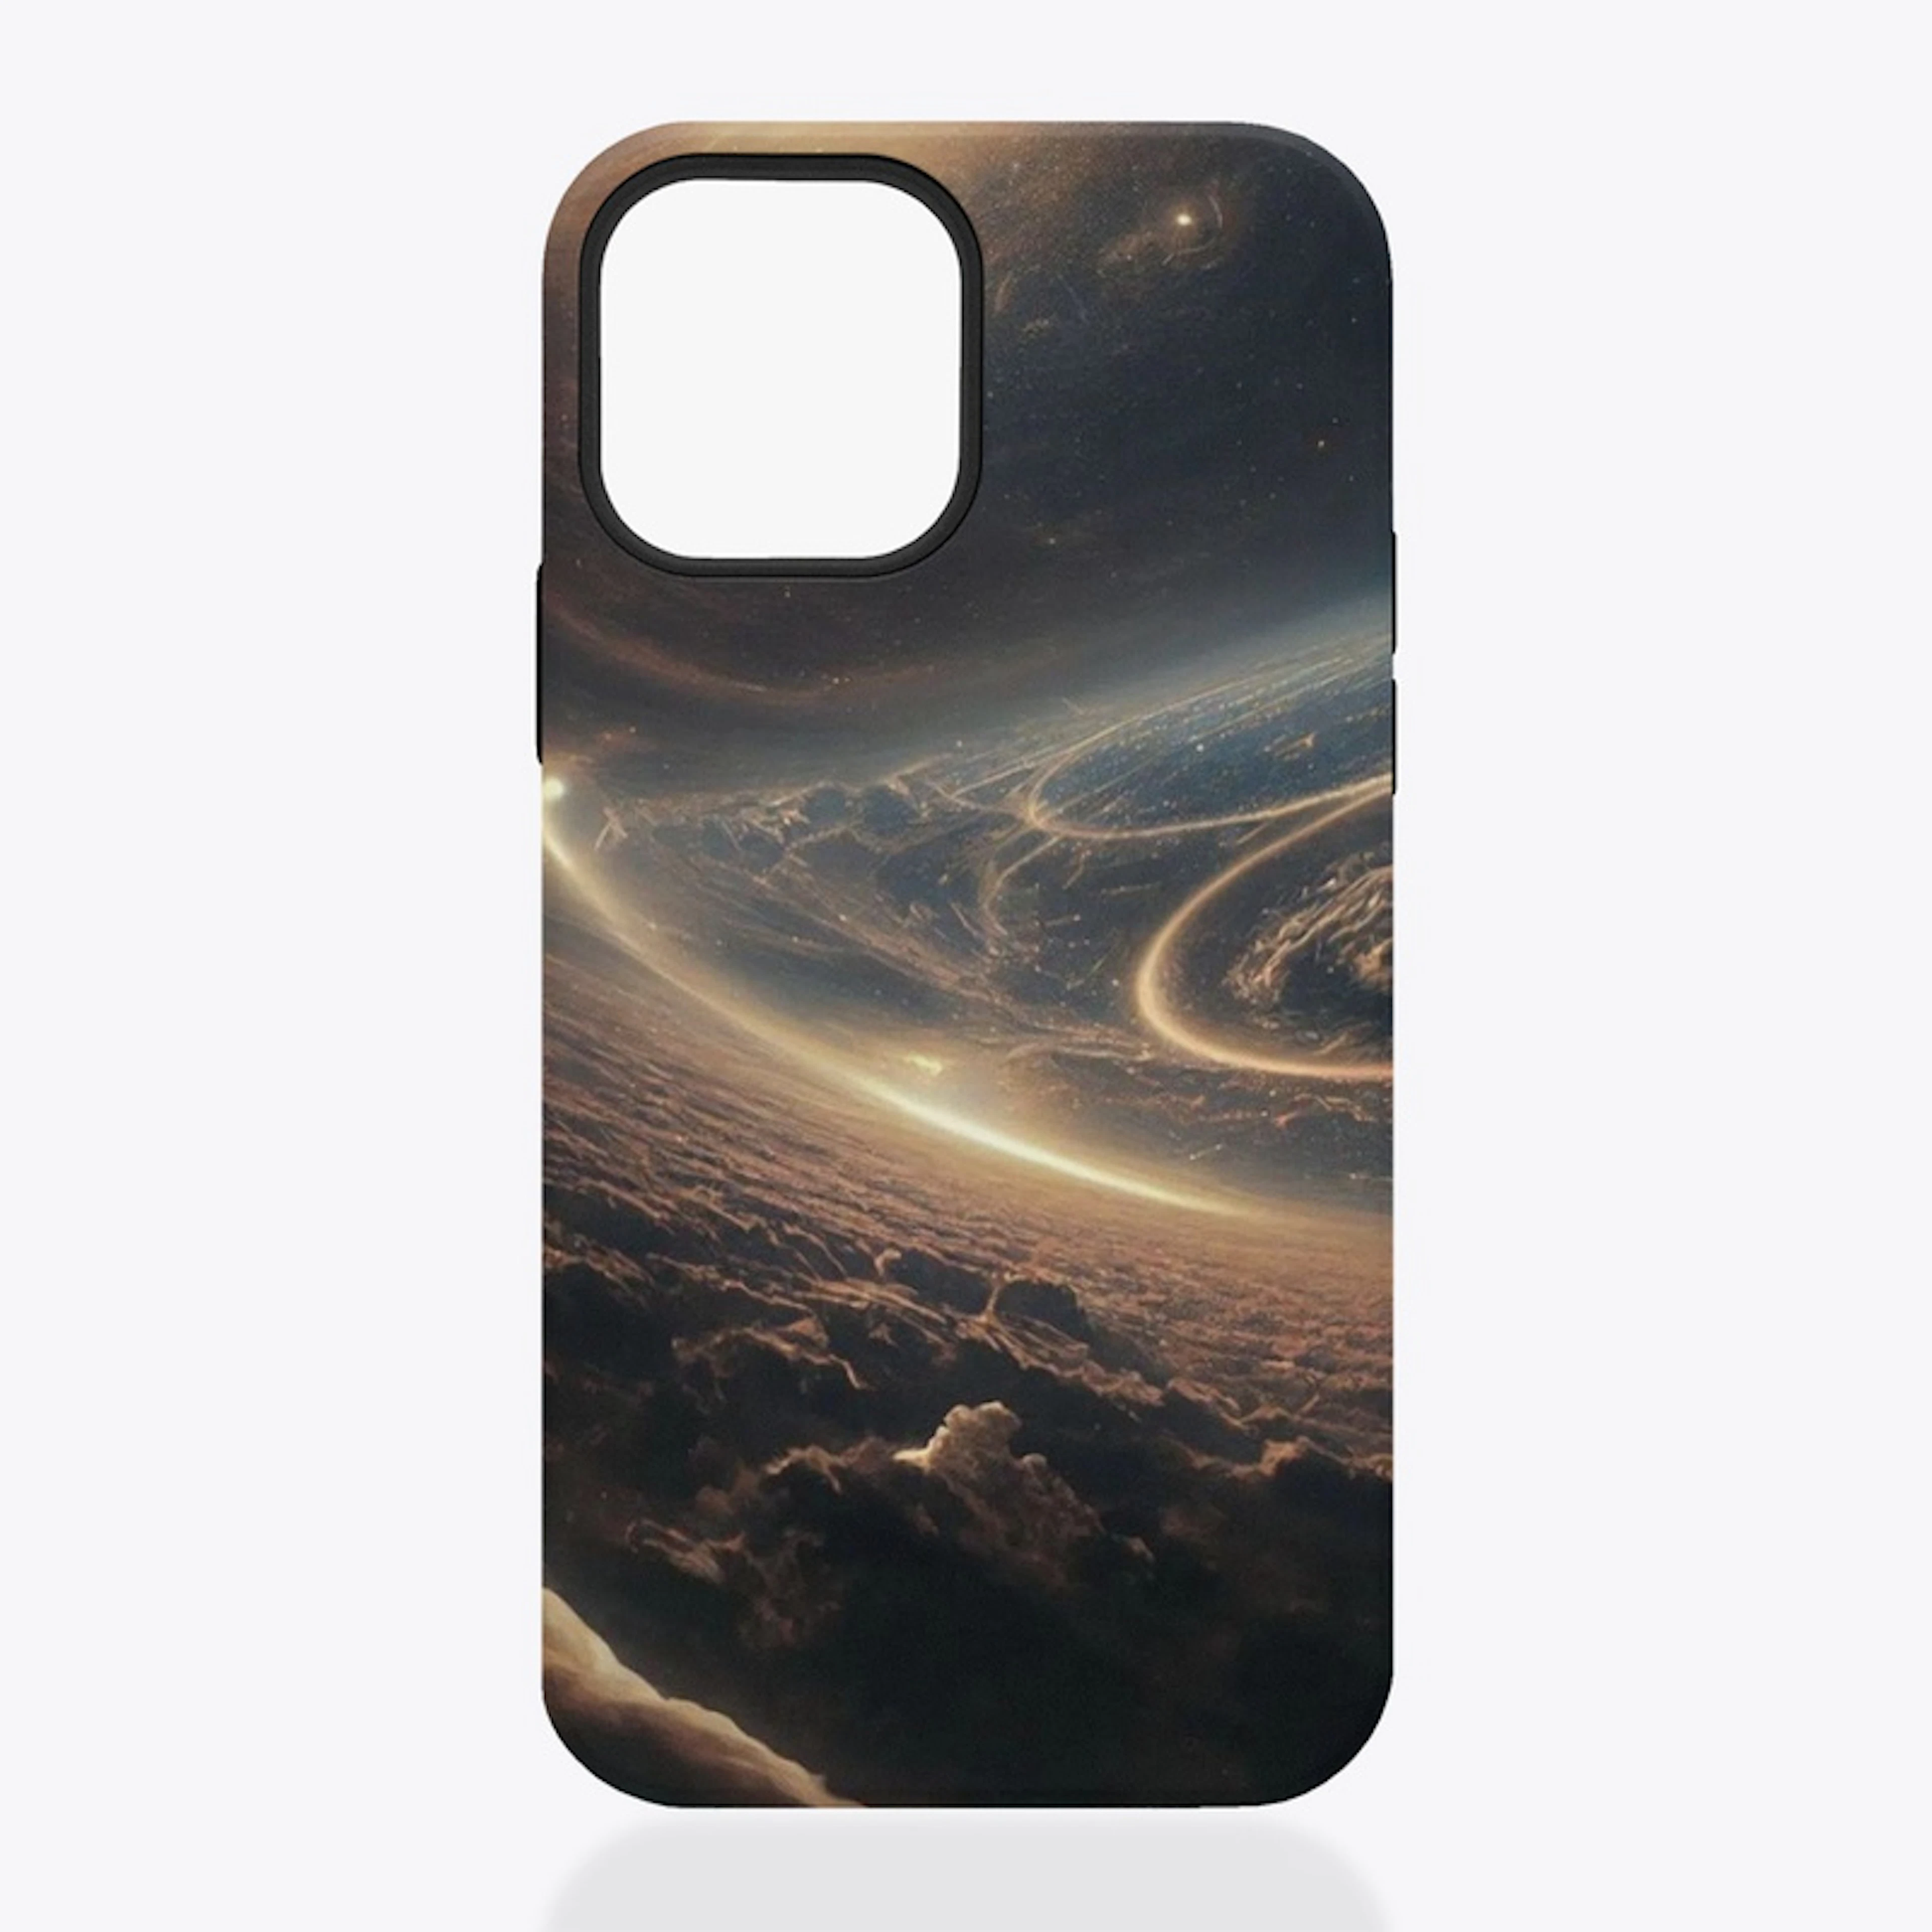 iPhone - In Space